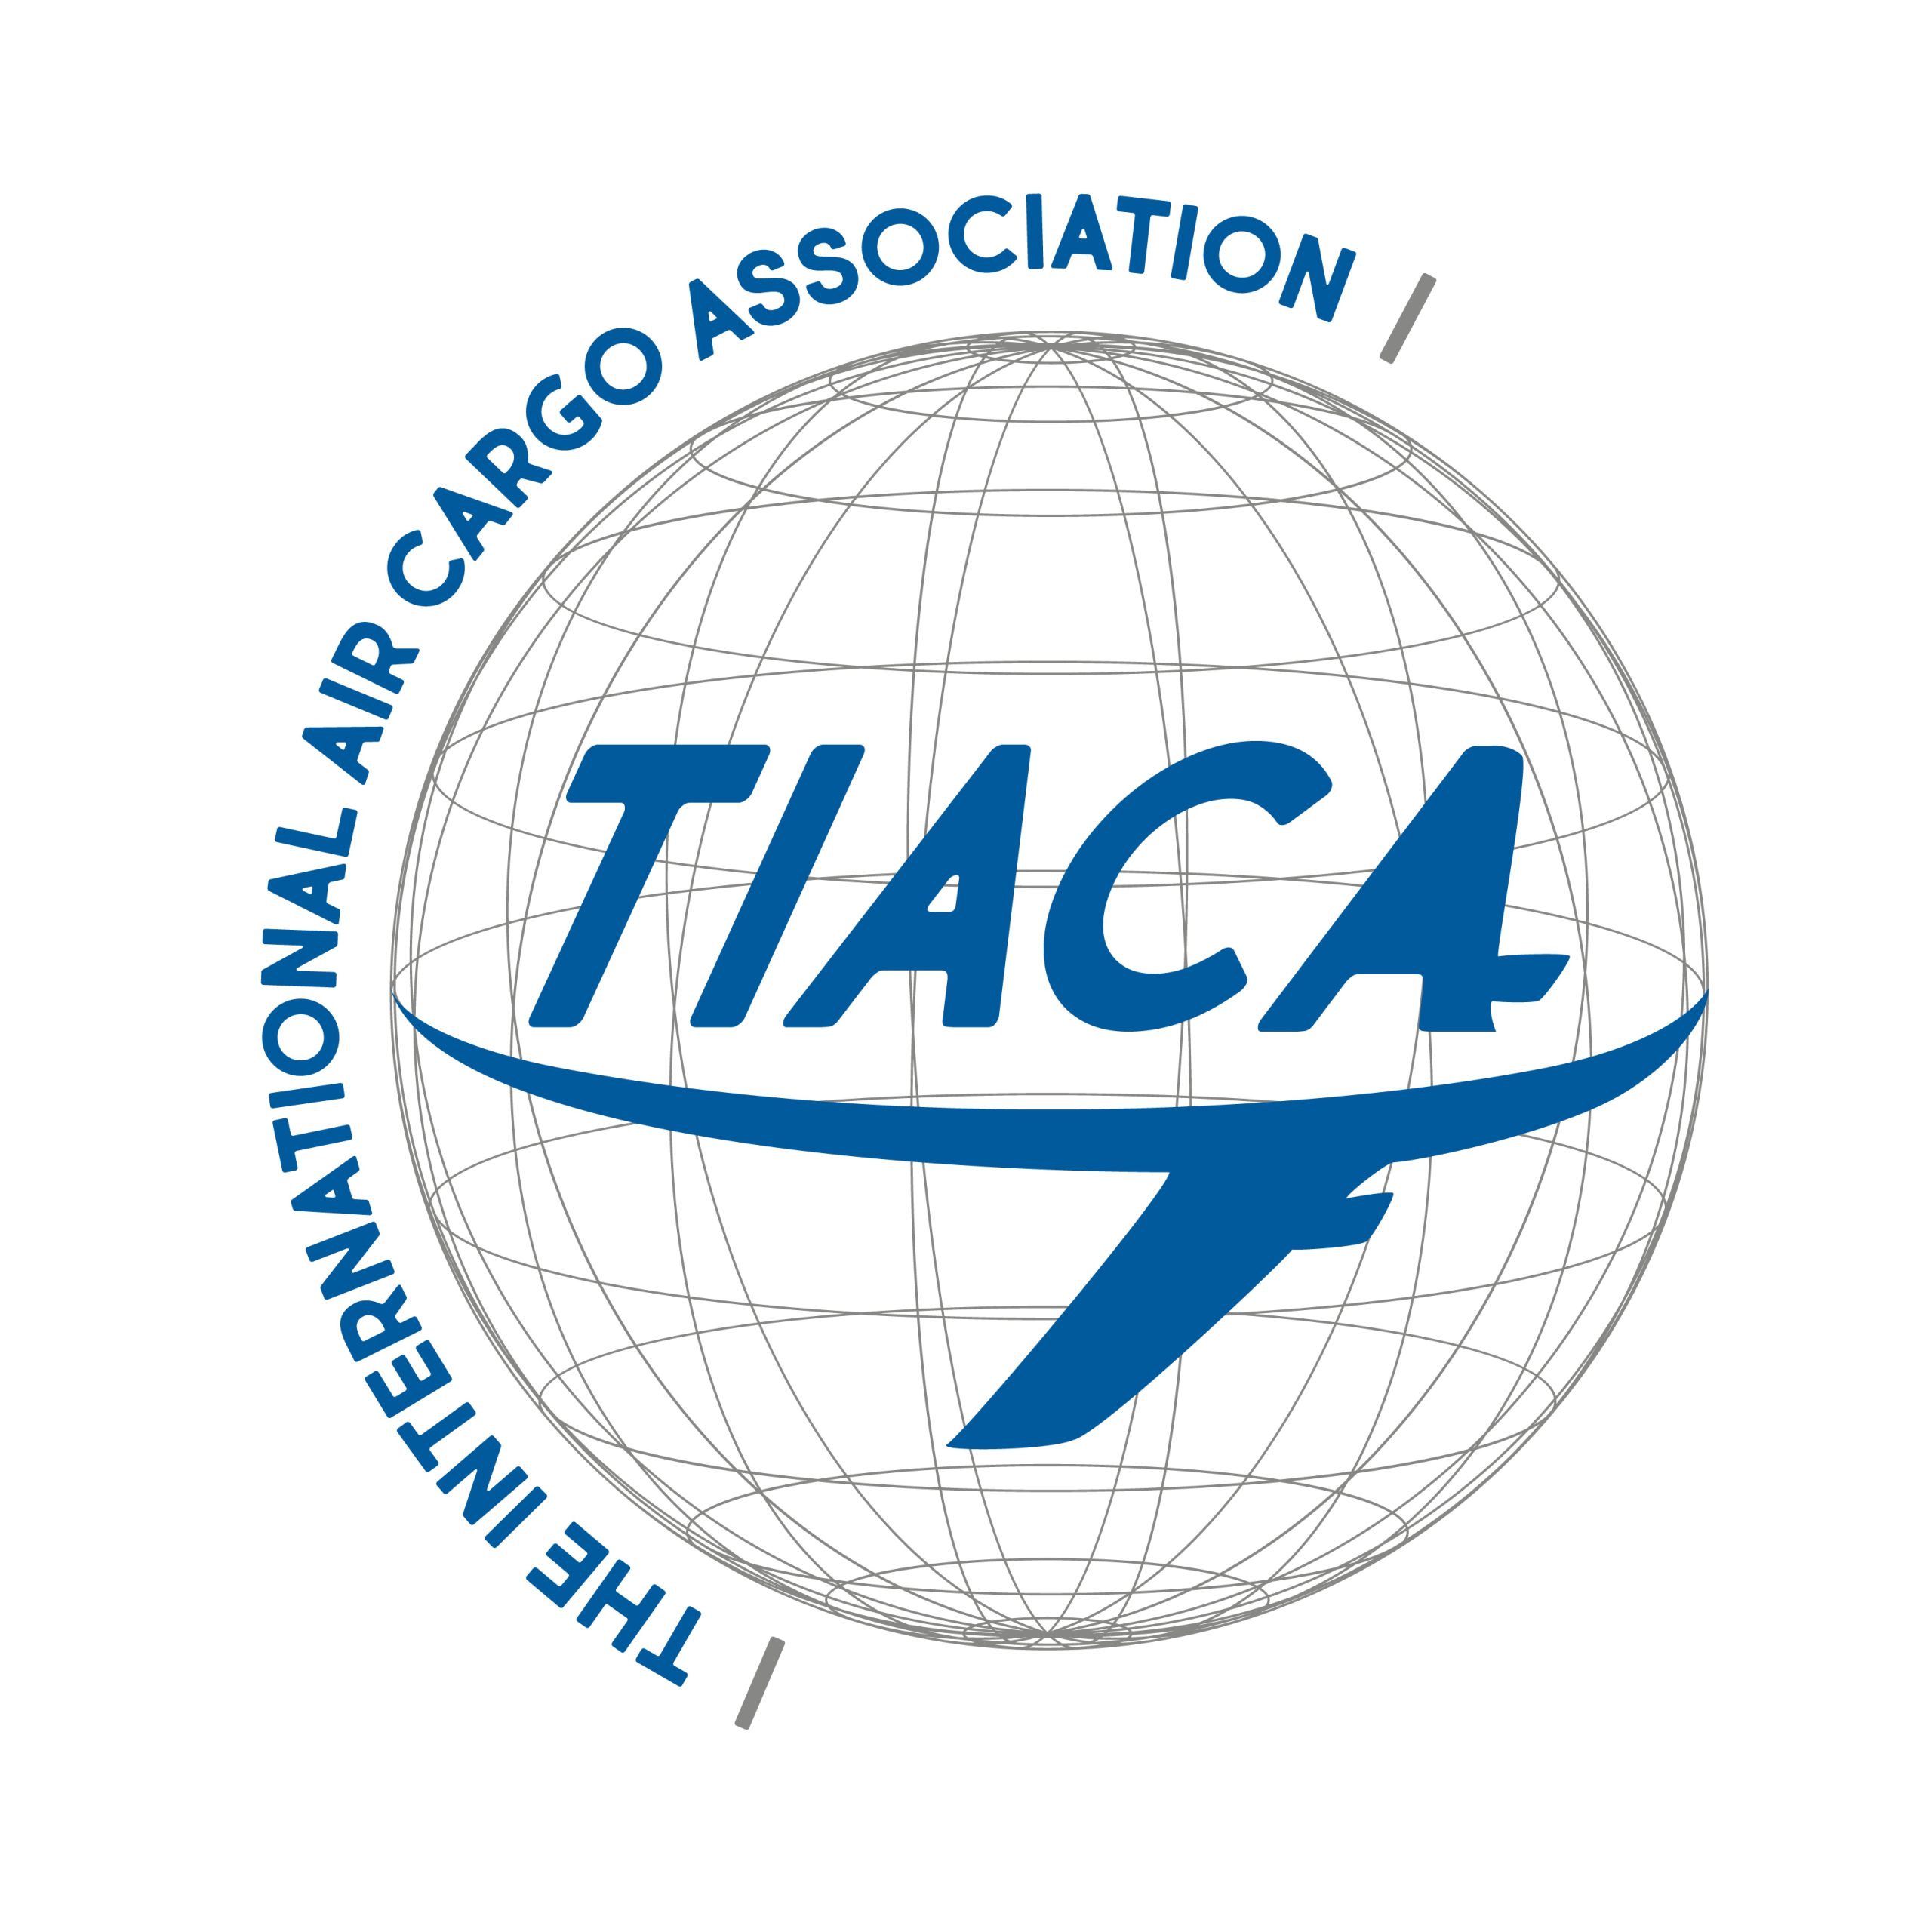 TIACA accelerates its transformation to better meet its members’ needs